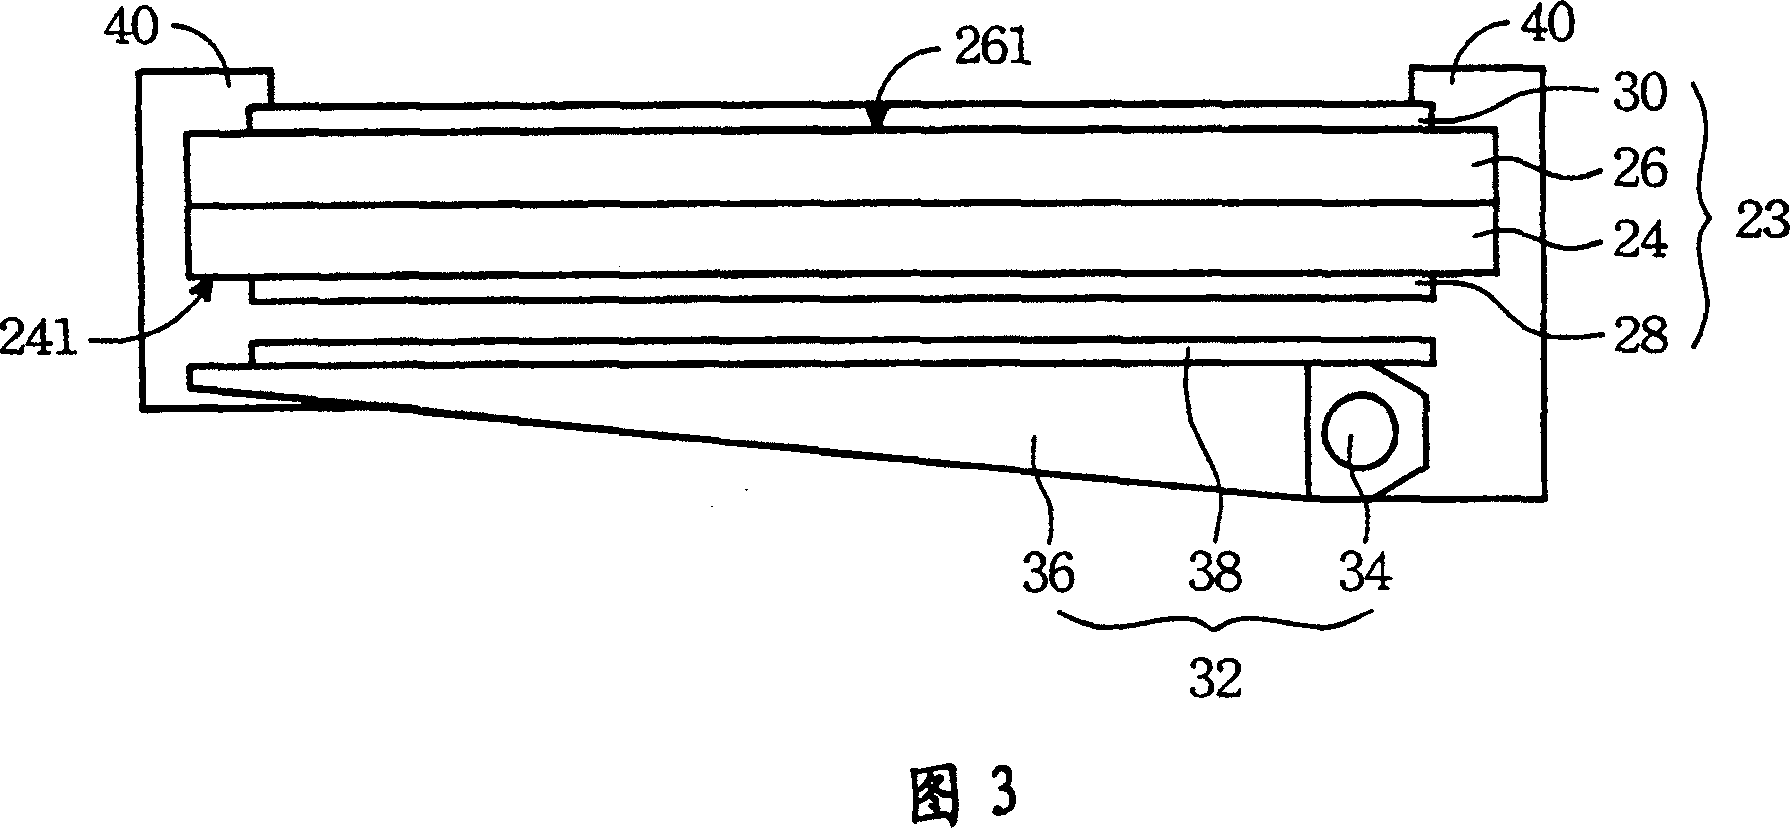 Liquid-crystal displaying device and producing method thereof